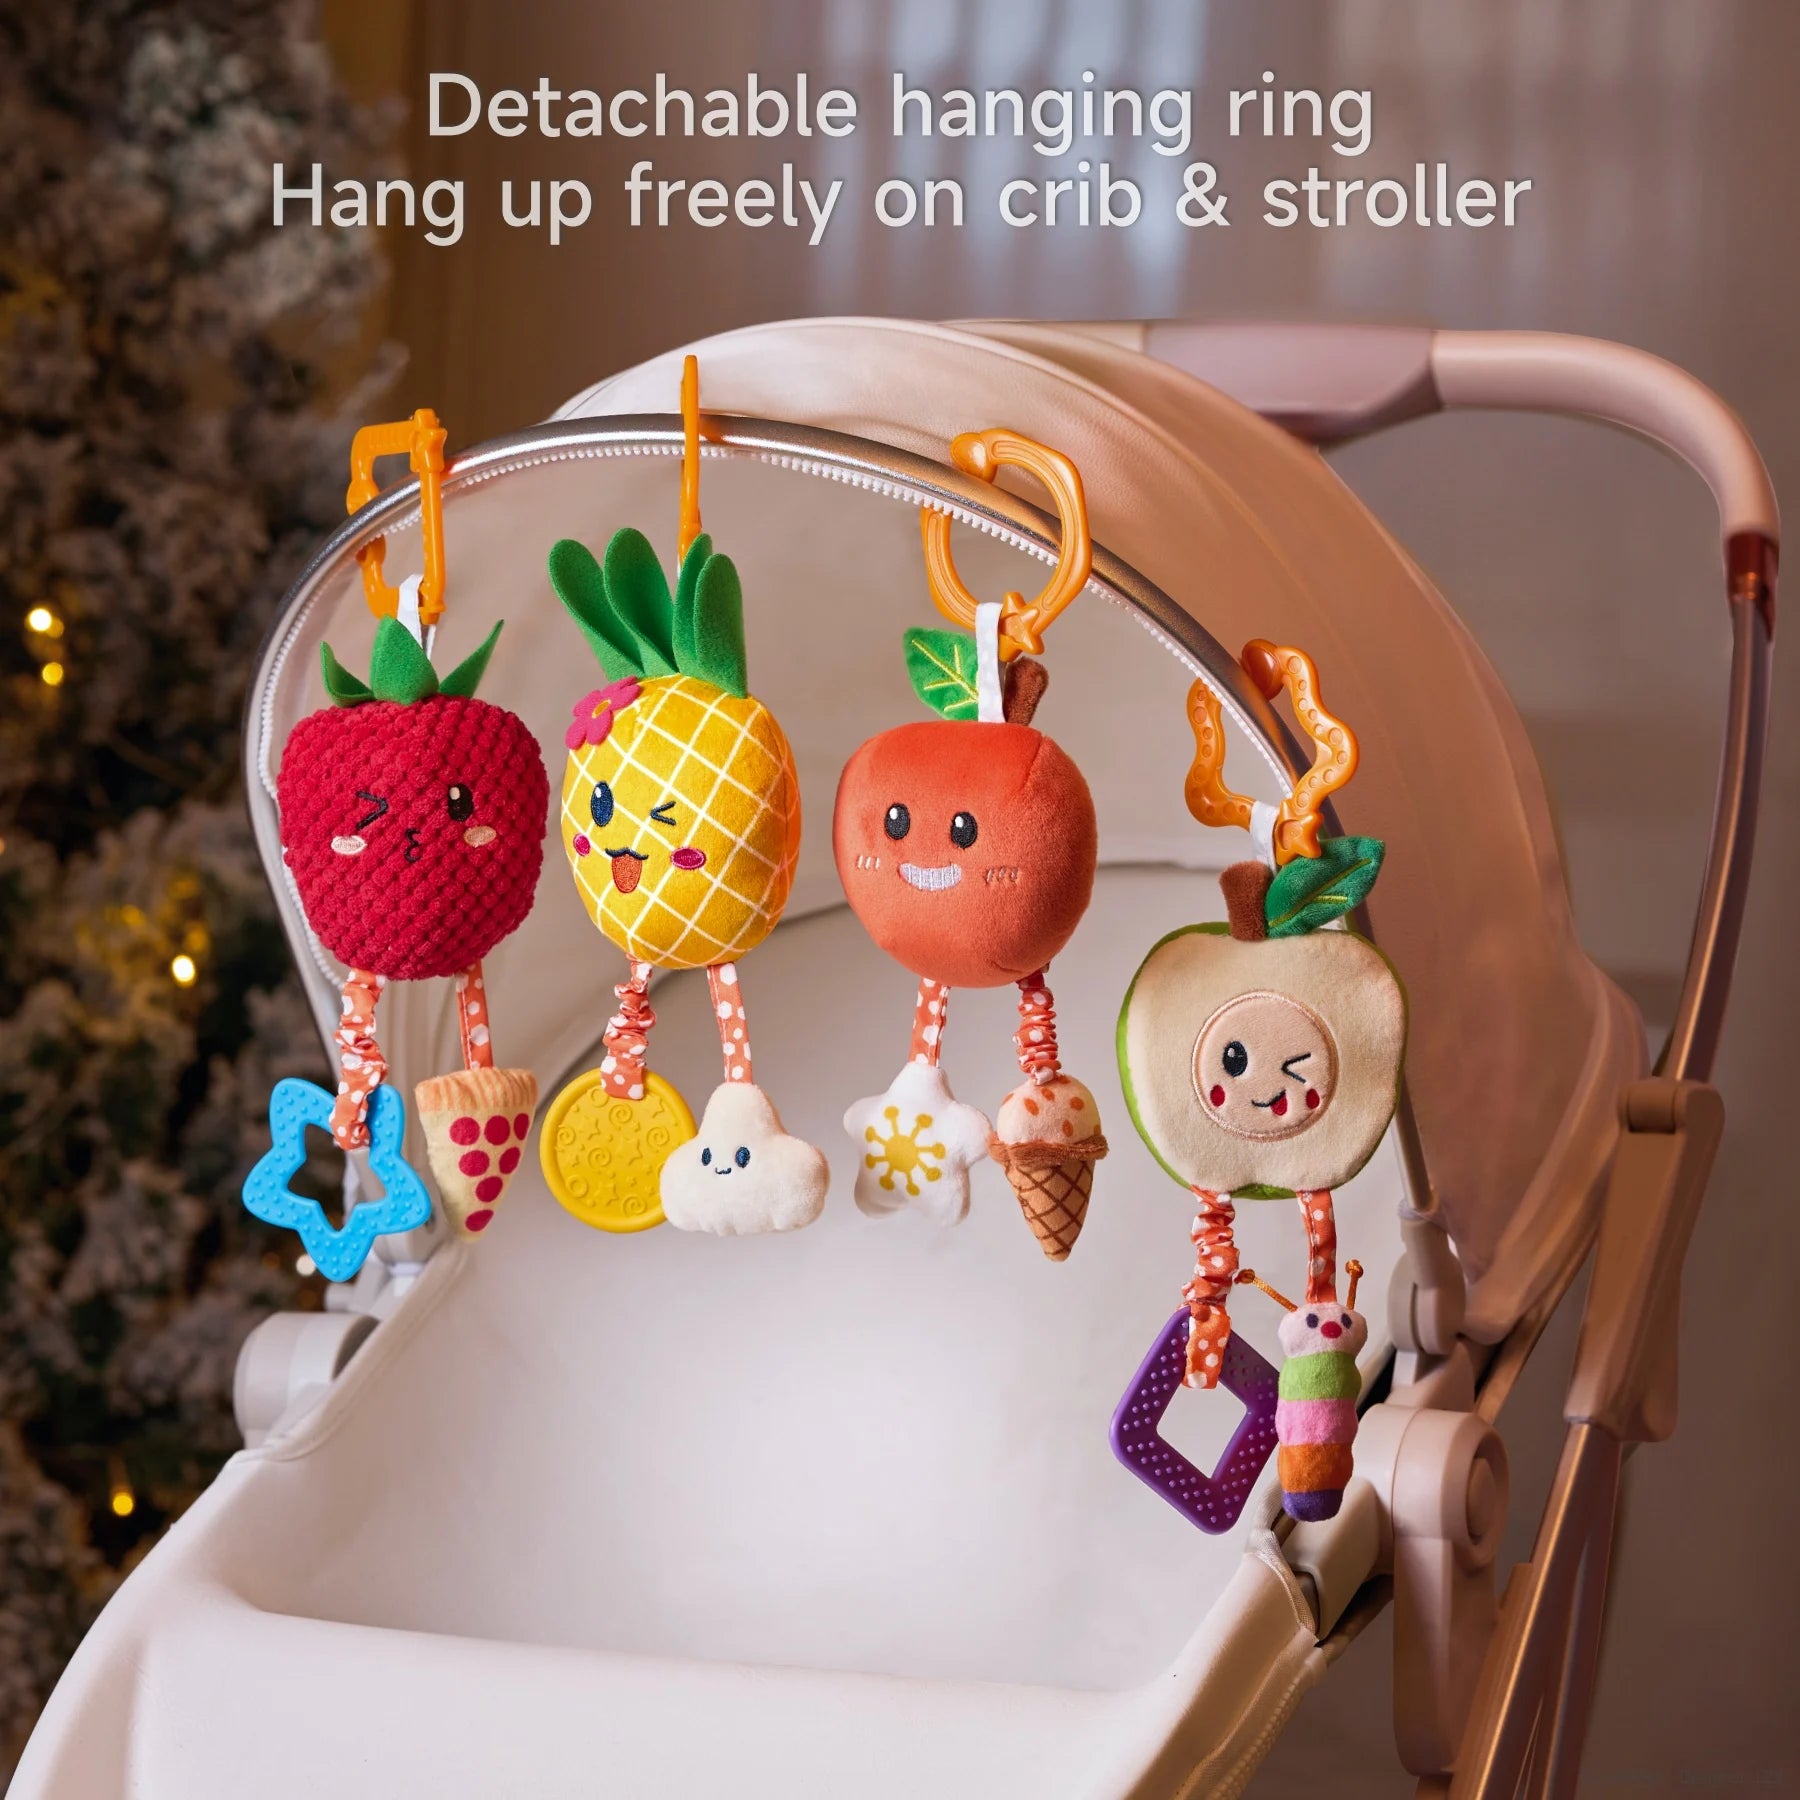 Newborn infant play set with hanging fruit rattles